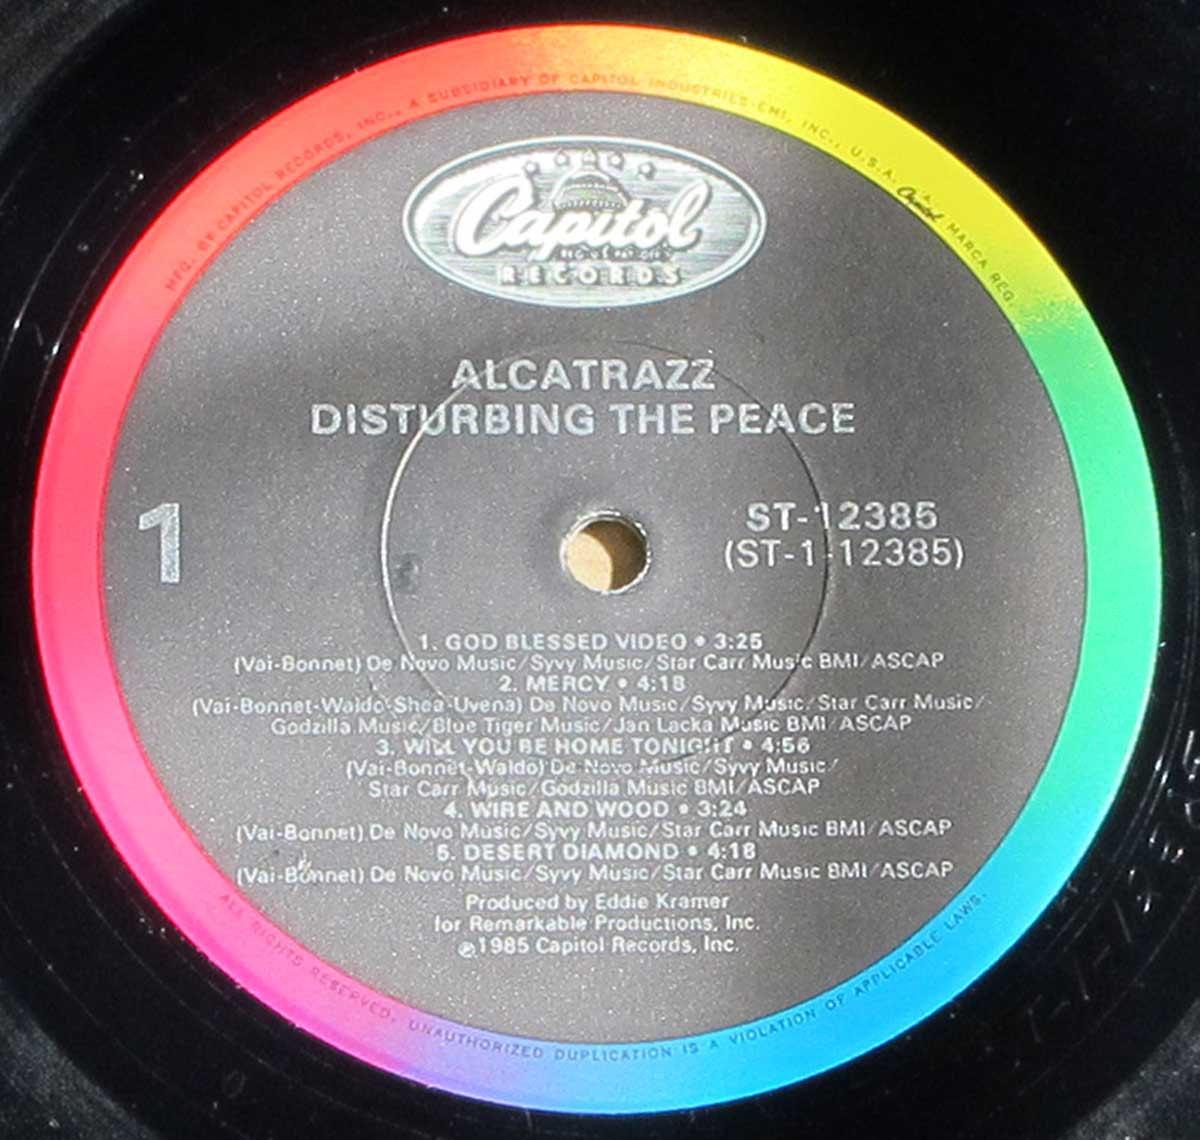 Enlarged High Resolution Photo of the Record's label ALCATRAZZ - Disturbing the Peace https://vinyl-records.nl